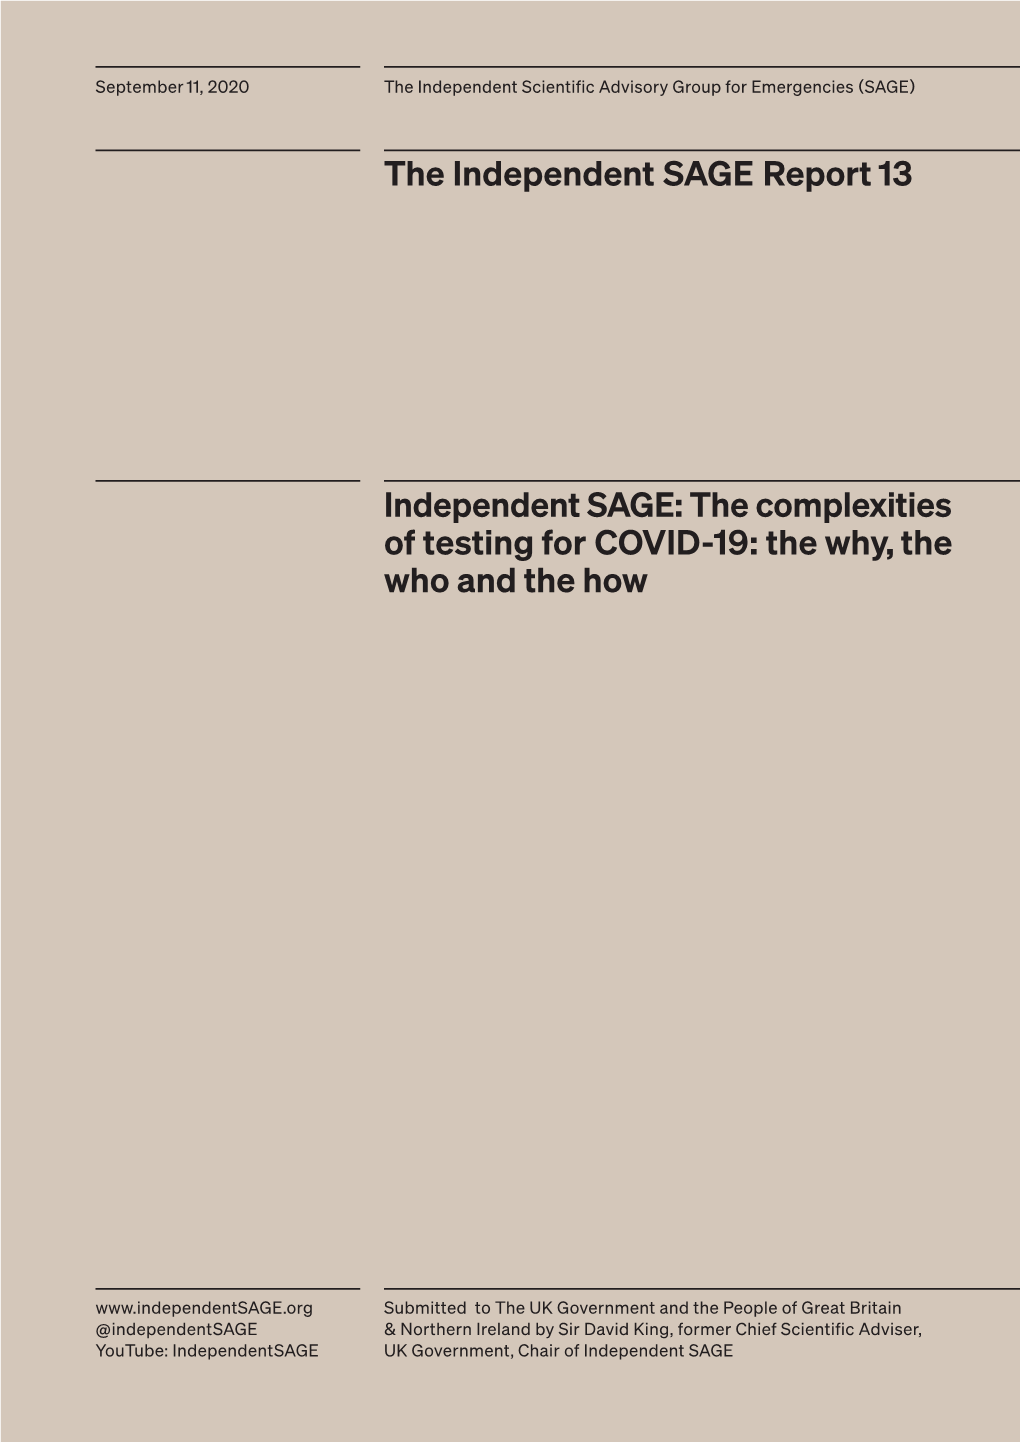 The Complexities of Testing for COVID-19: the Why, the Who and the How